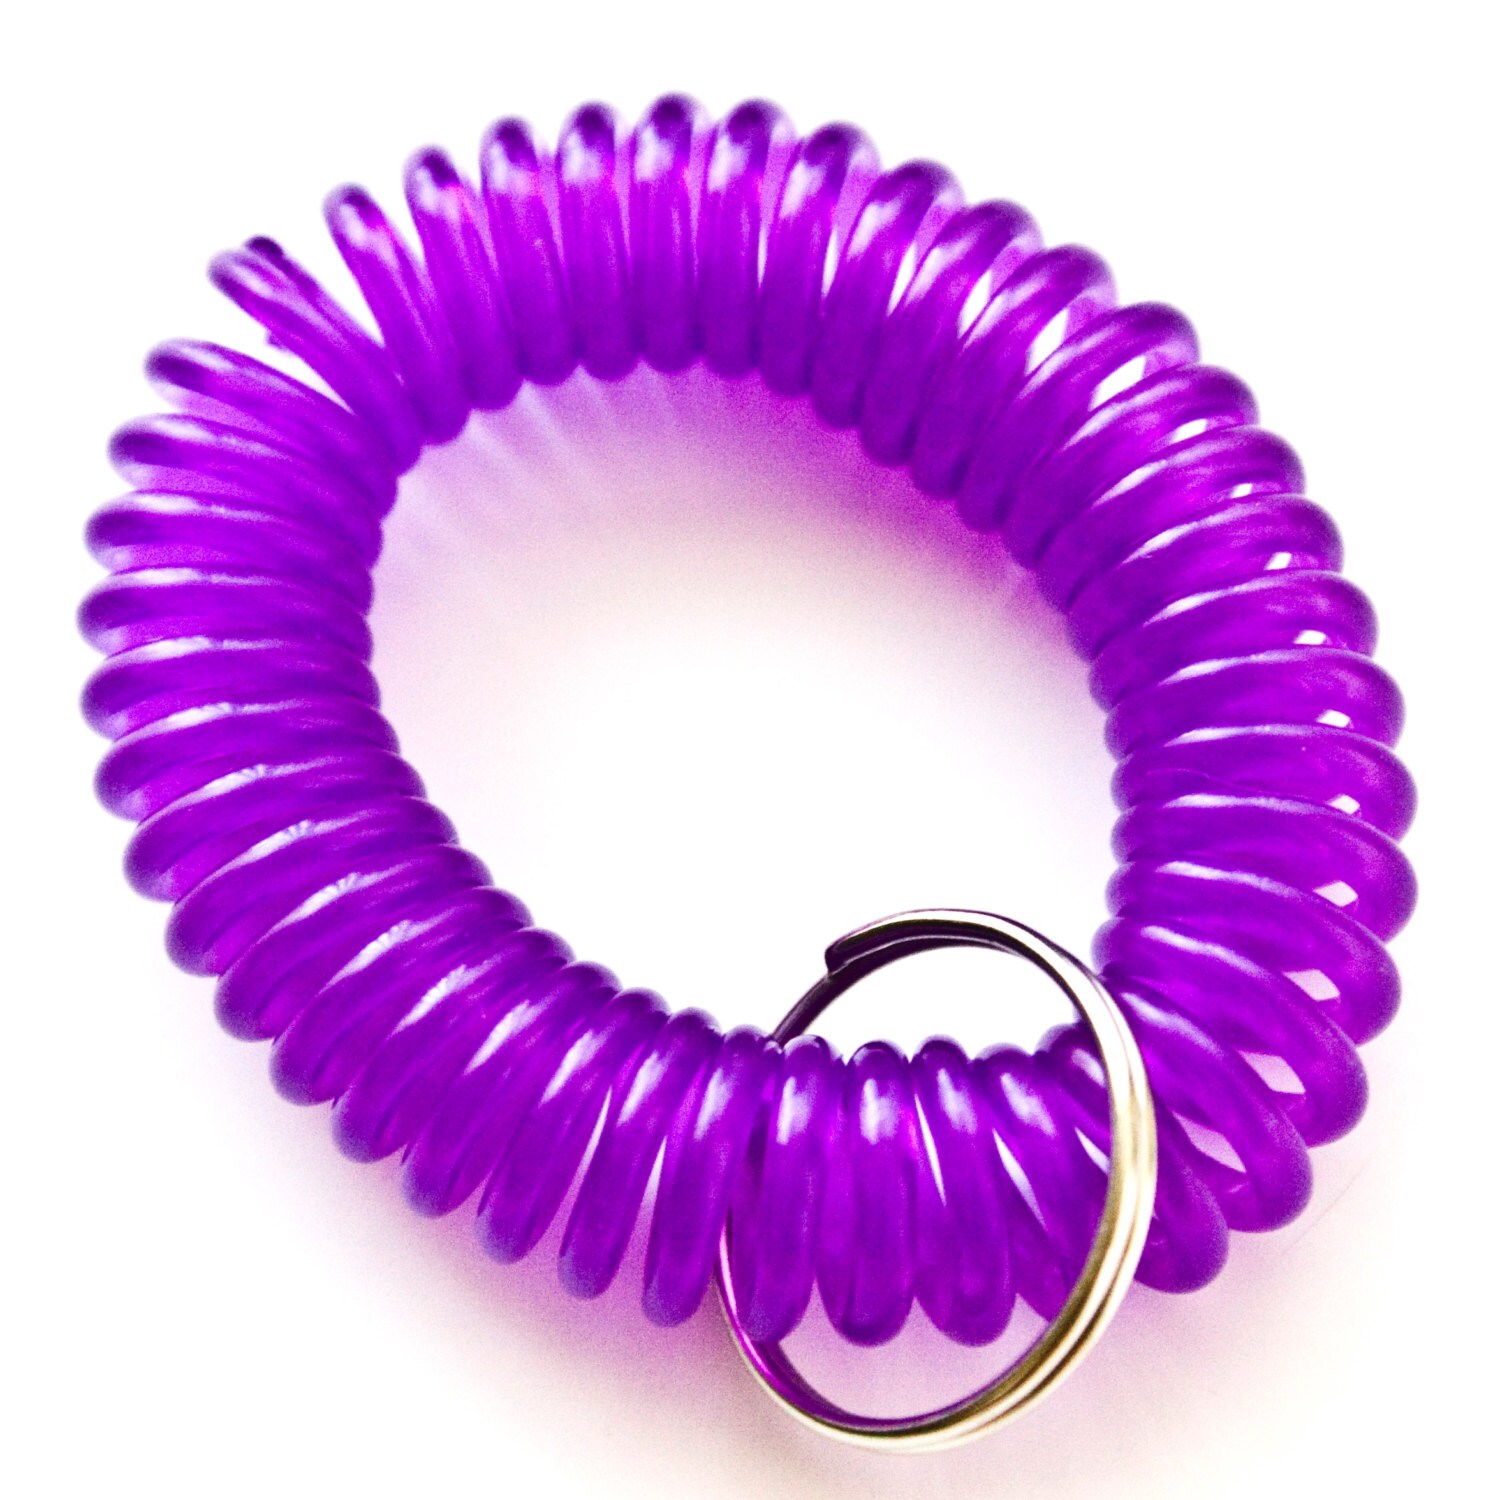 60pcs PURPLE BLACK GREEN Color Soft High Quality Spring Spiral Coil Elastic  Wrist Band Key Ring Chain -  Ireland